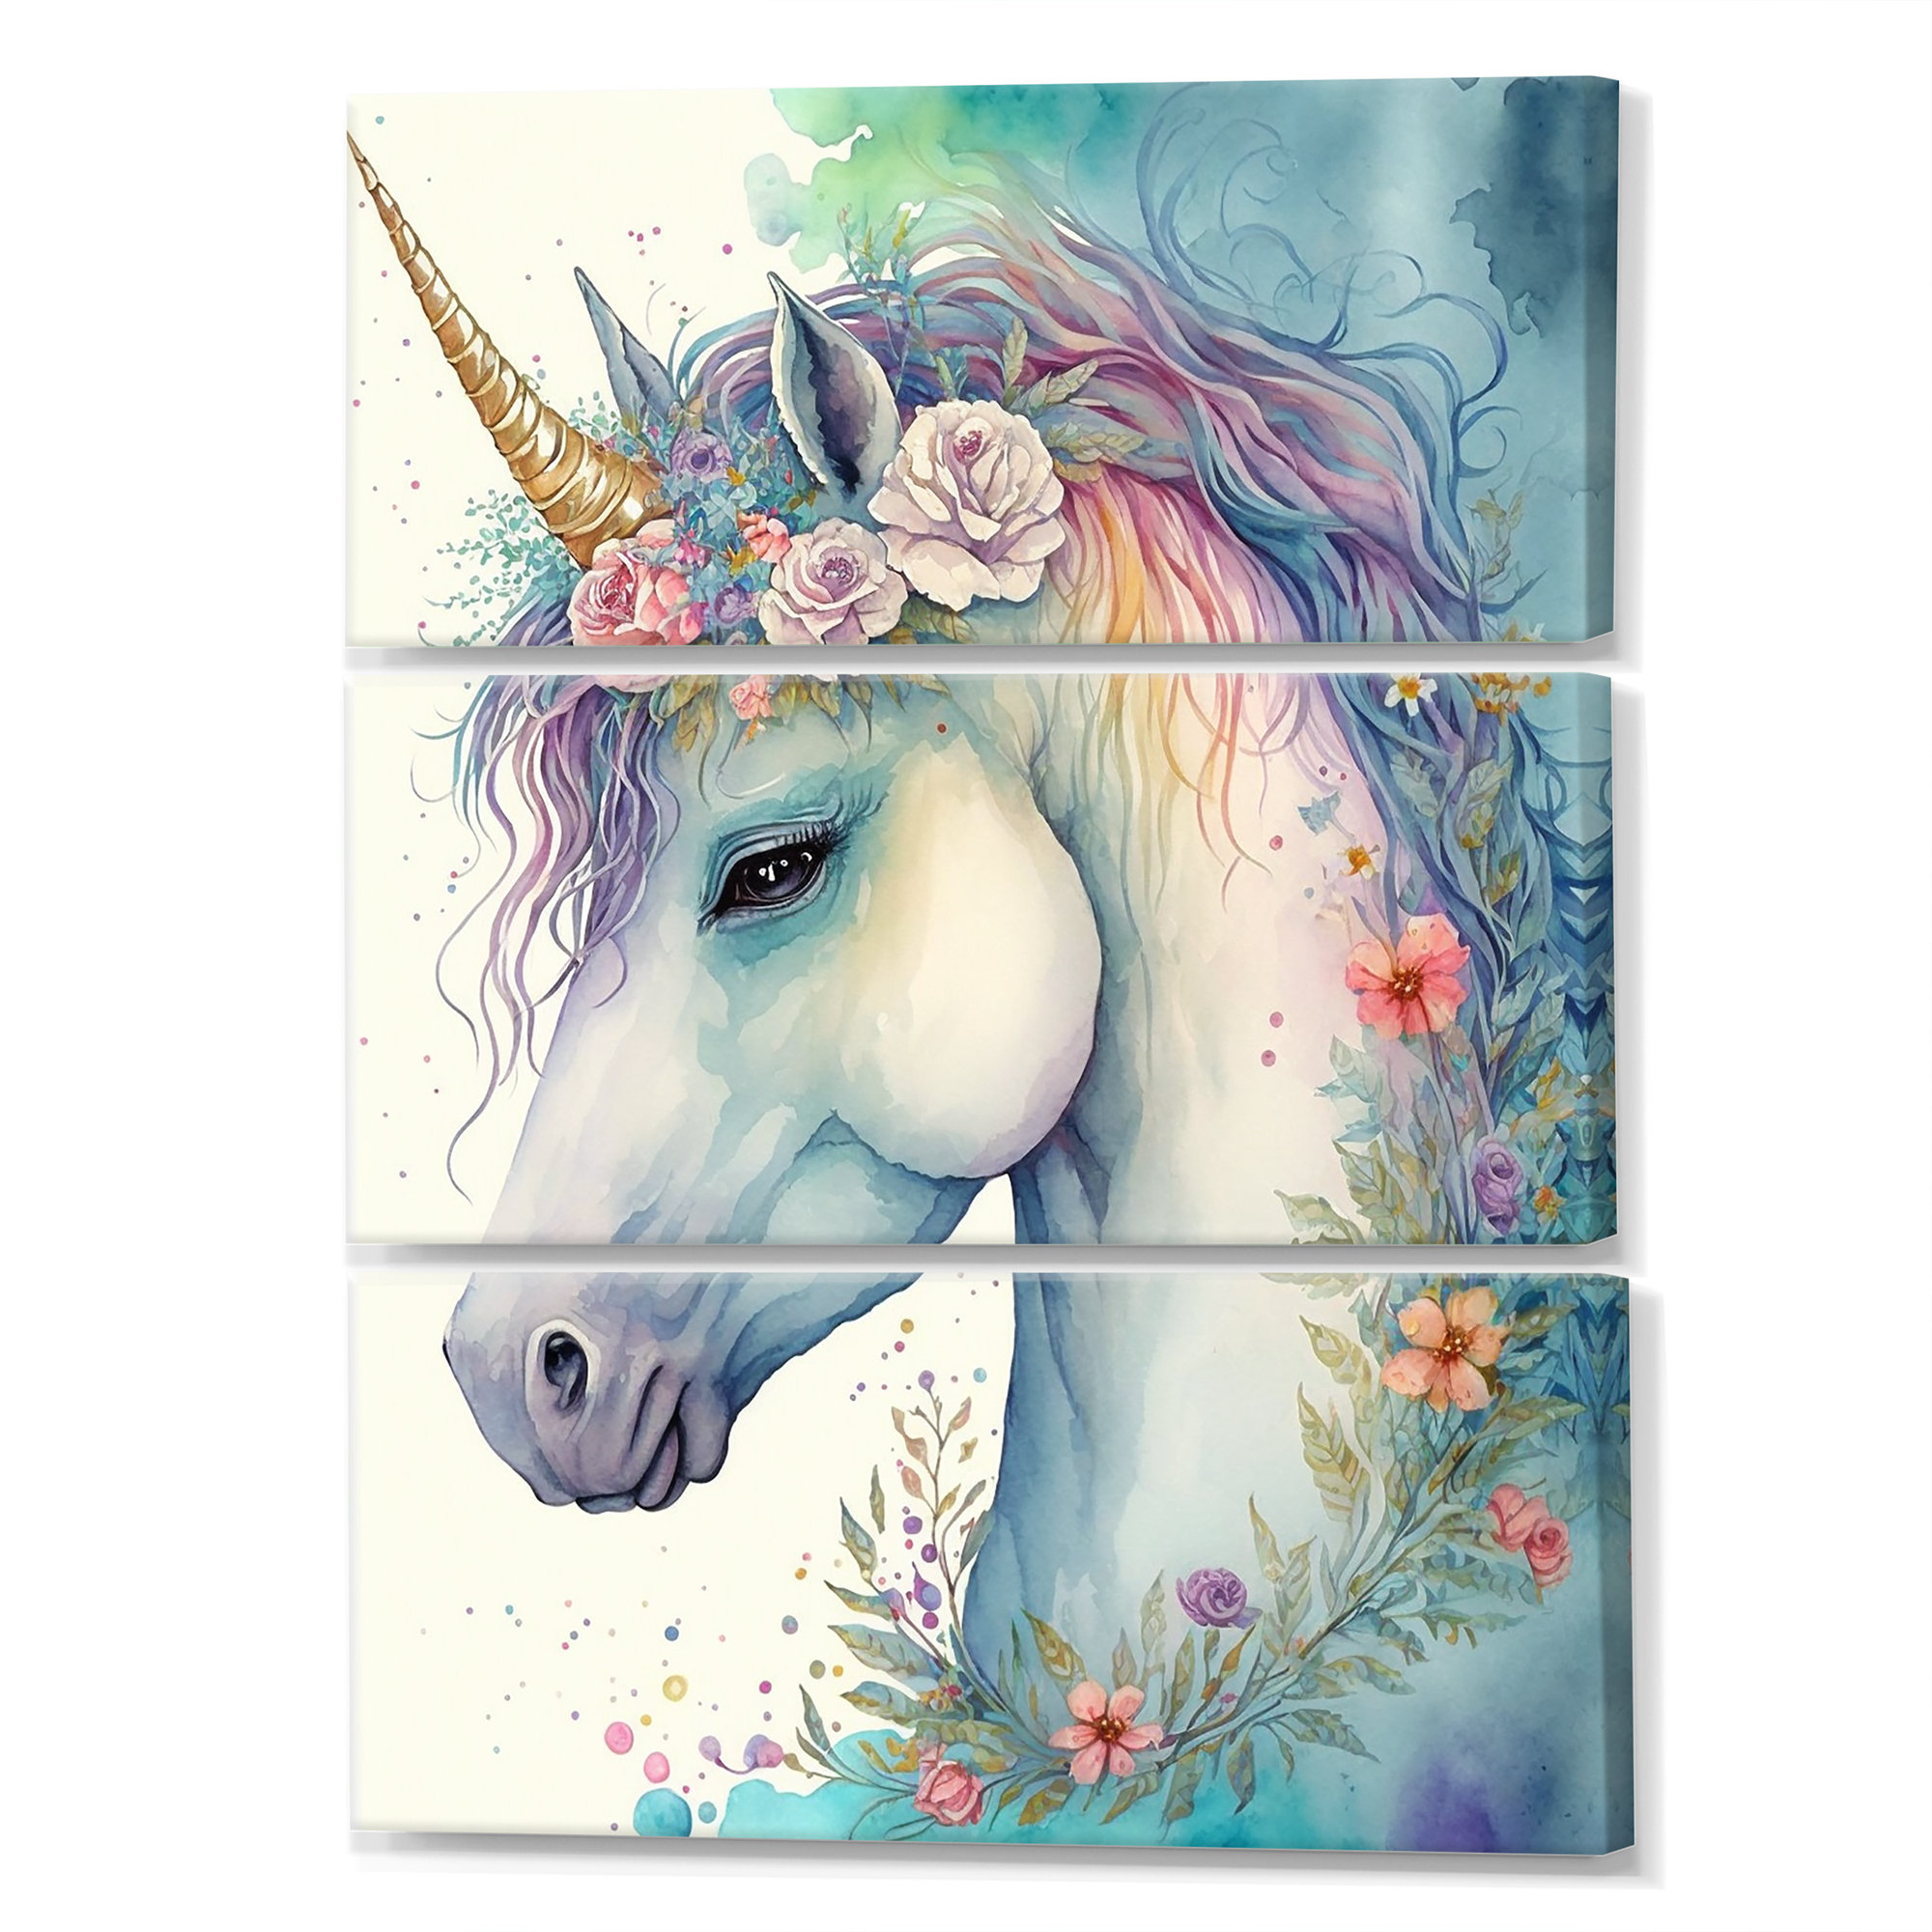 Two Mythical Unicorn Gifts Fantasy Wall Decor Art Print Framed